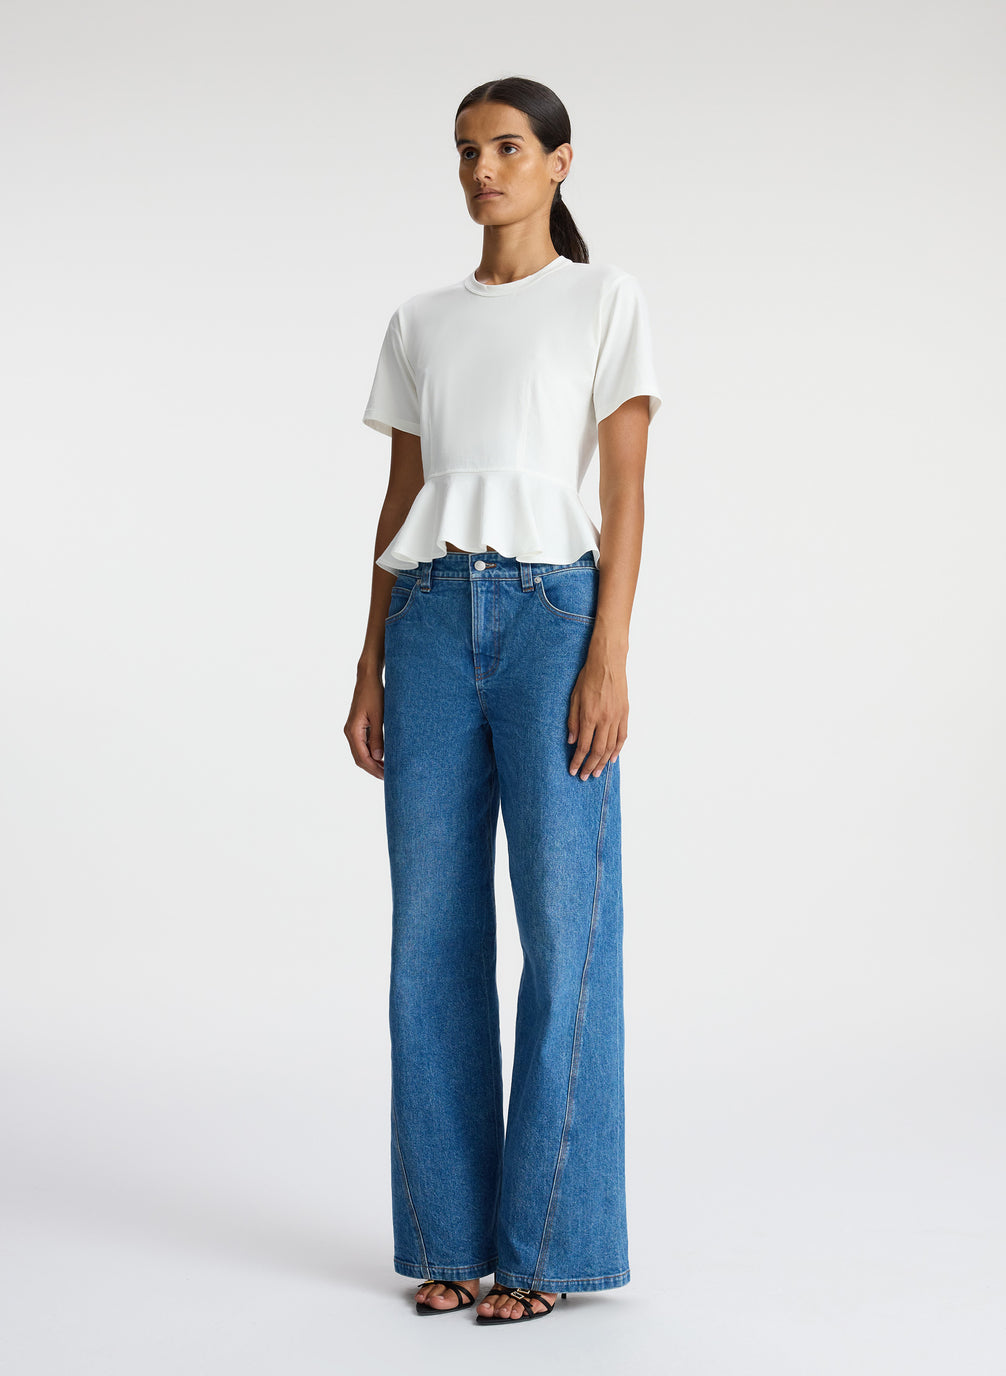 side  view of woman wearing white peplum tee and medium blue jeans